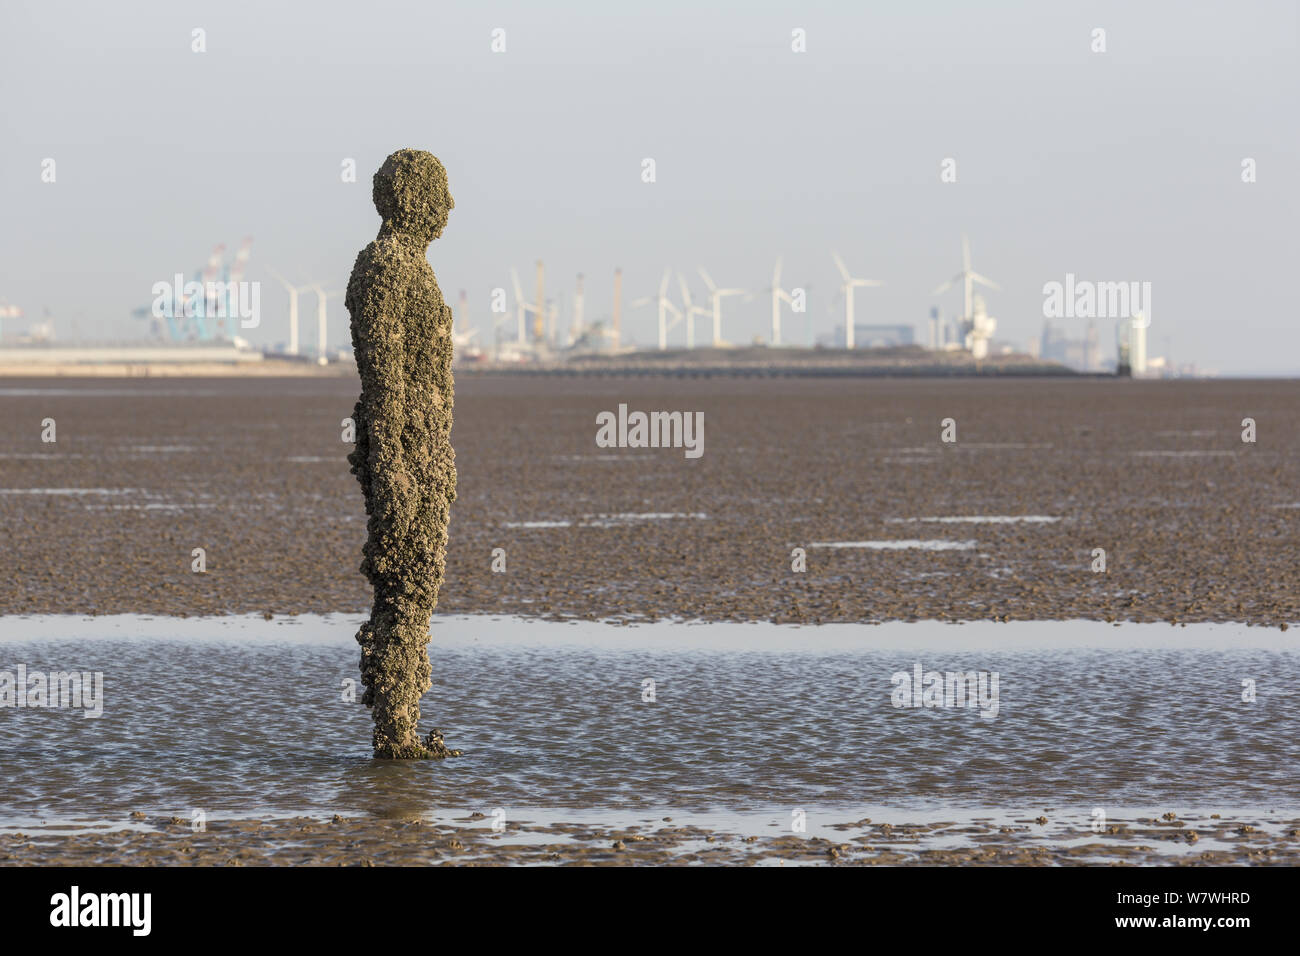 A figure from Antony Gormley&#39;s &#39;Another Place&#39; installation covered in barnacles, including the invasive Austrominius modestus. Crosby, Merseyside, UK, April 2014. Stock Photo